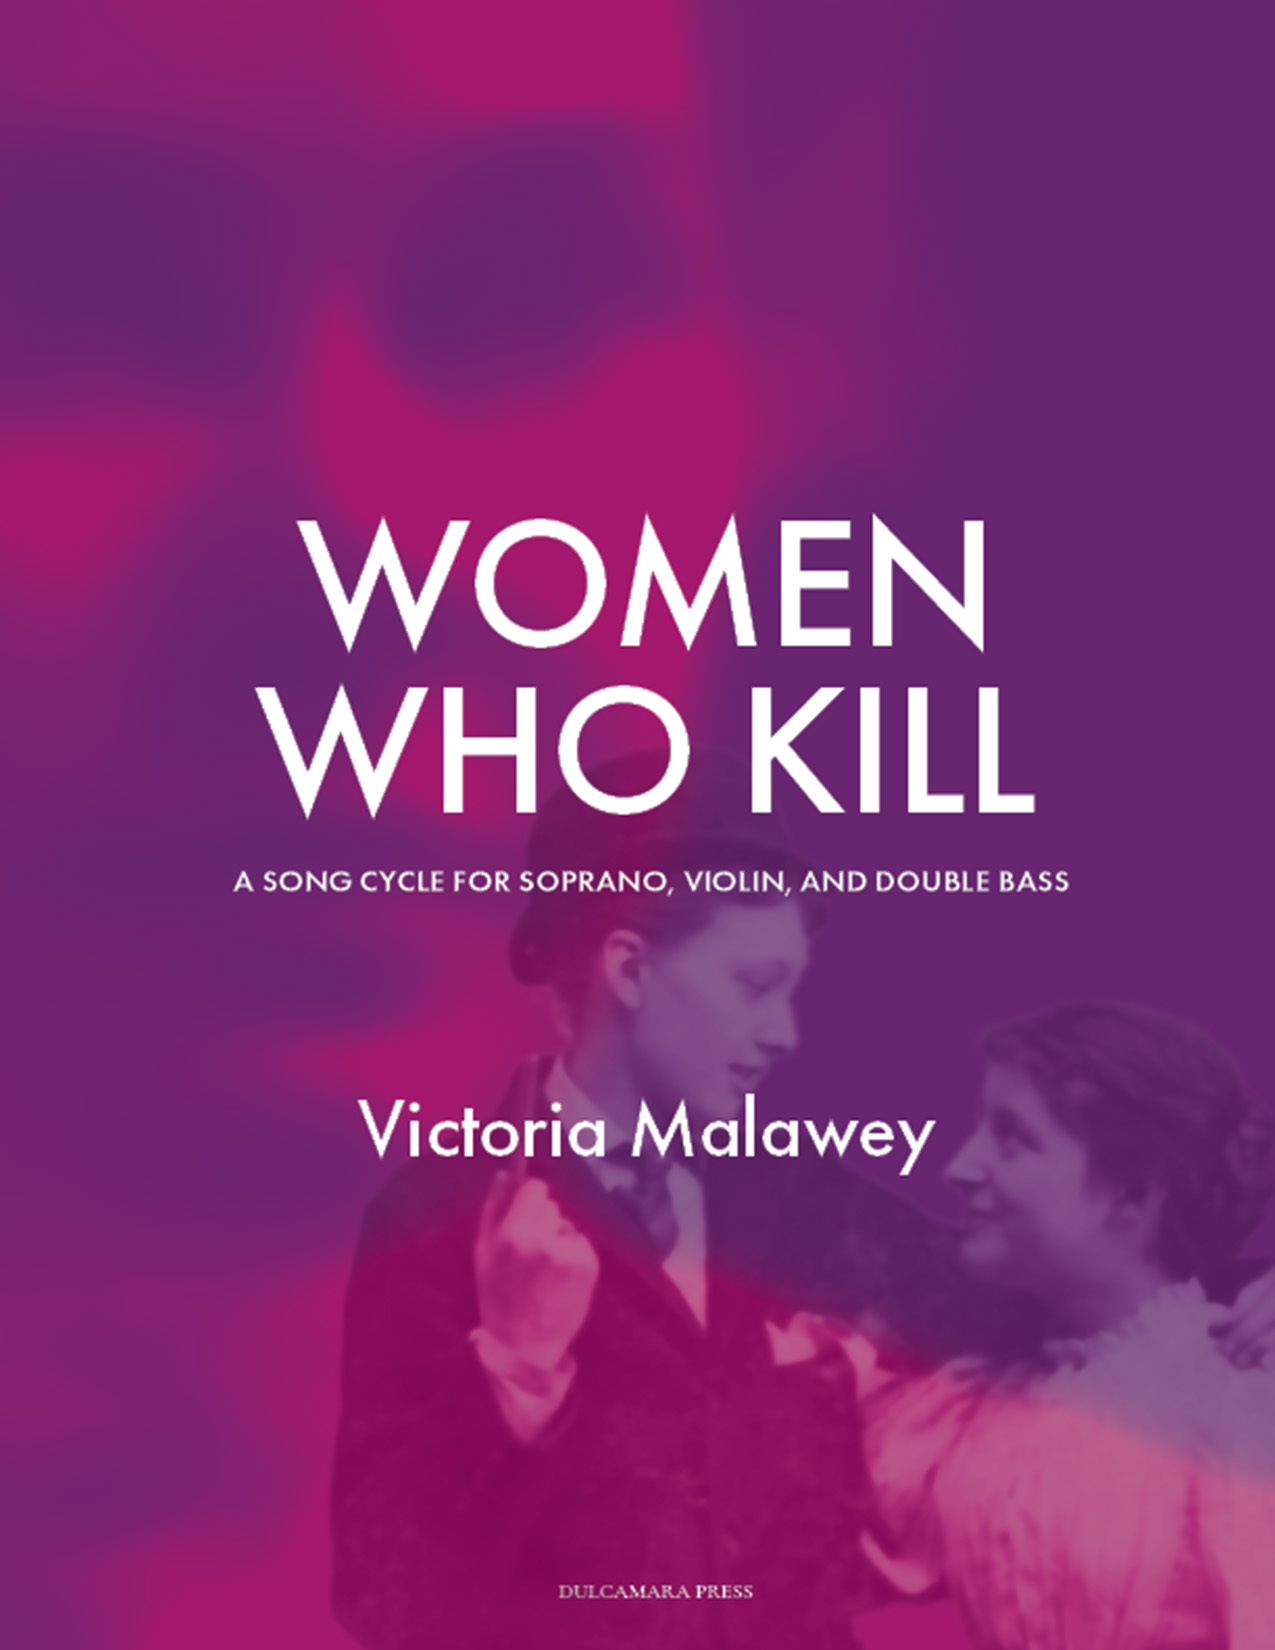 Women Who Kill; song cycle for soprano, violin, and double-bass by Victoria Malawey